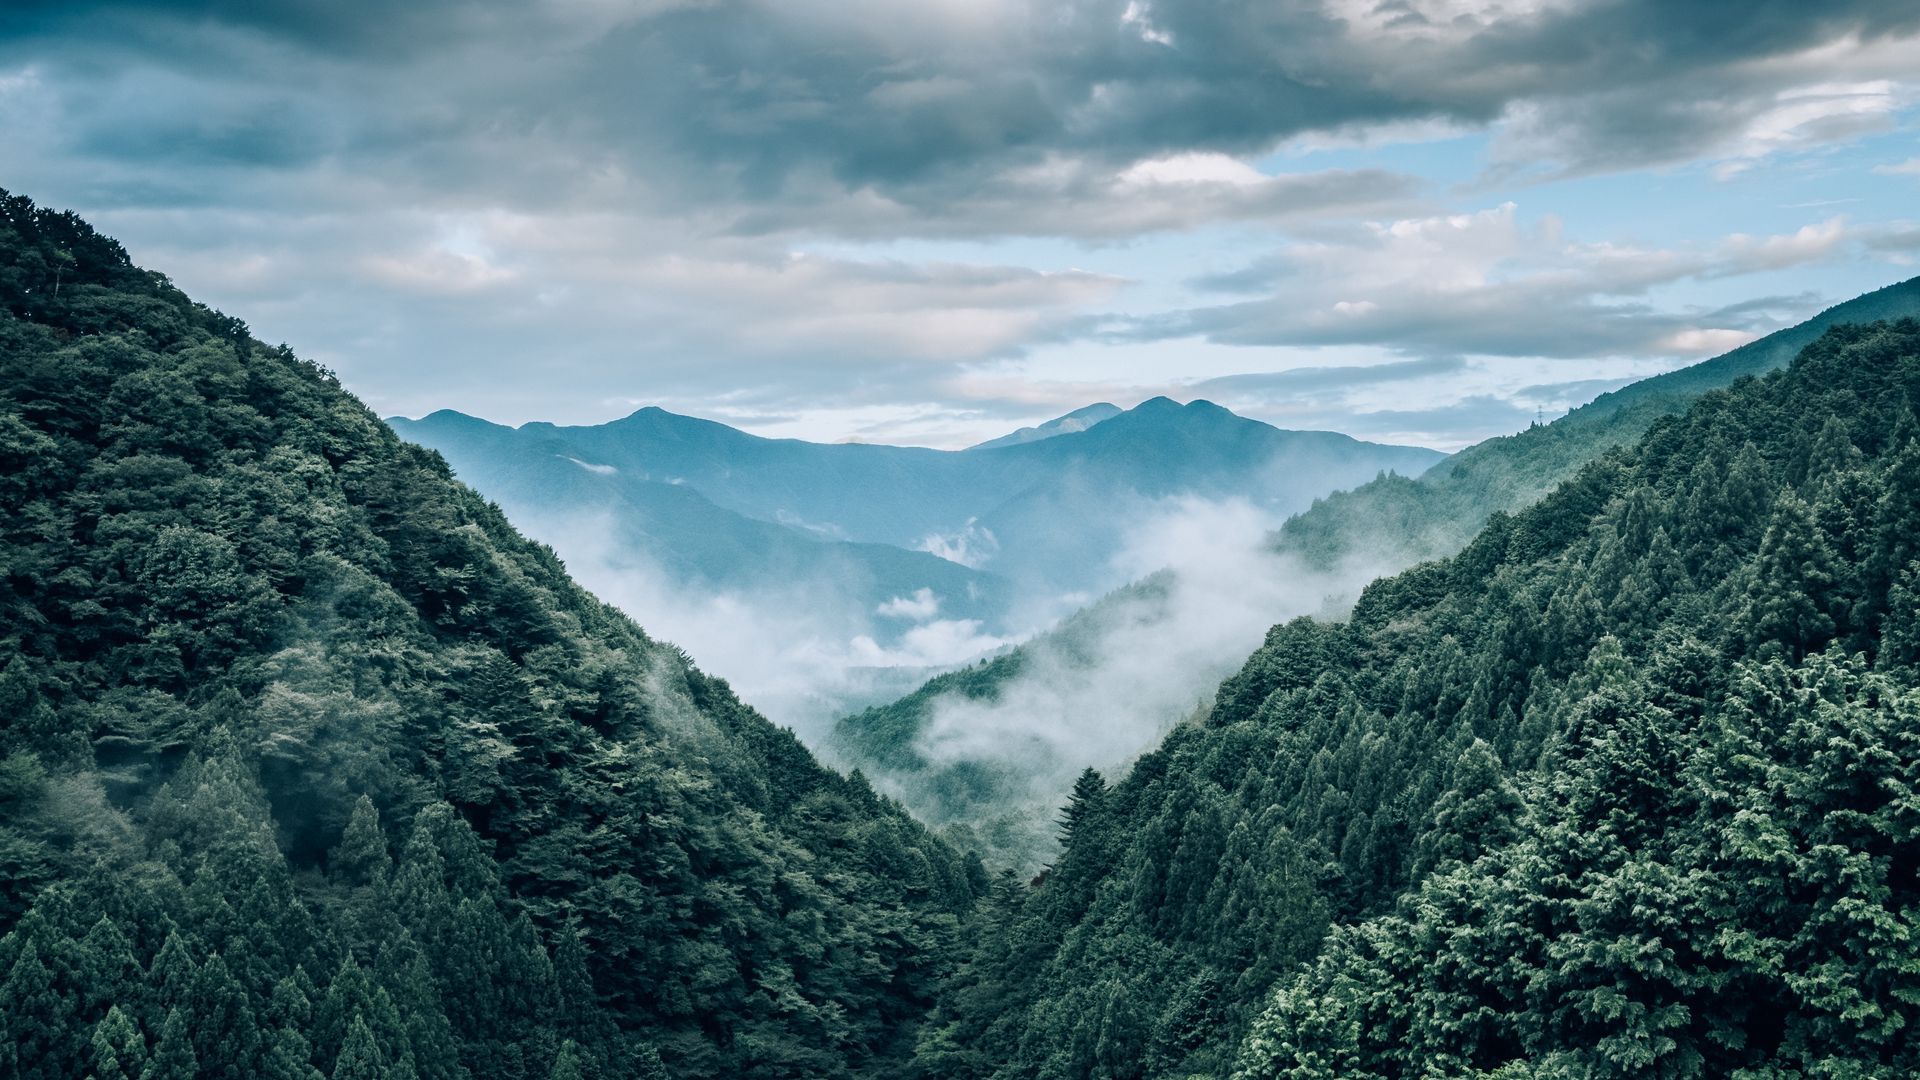 Wallpaper fog mountains trees aerial view landscape landscape wallpaper aerial views landscape mountain landscape